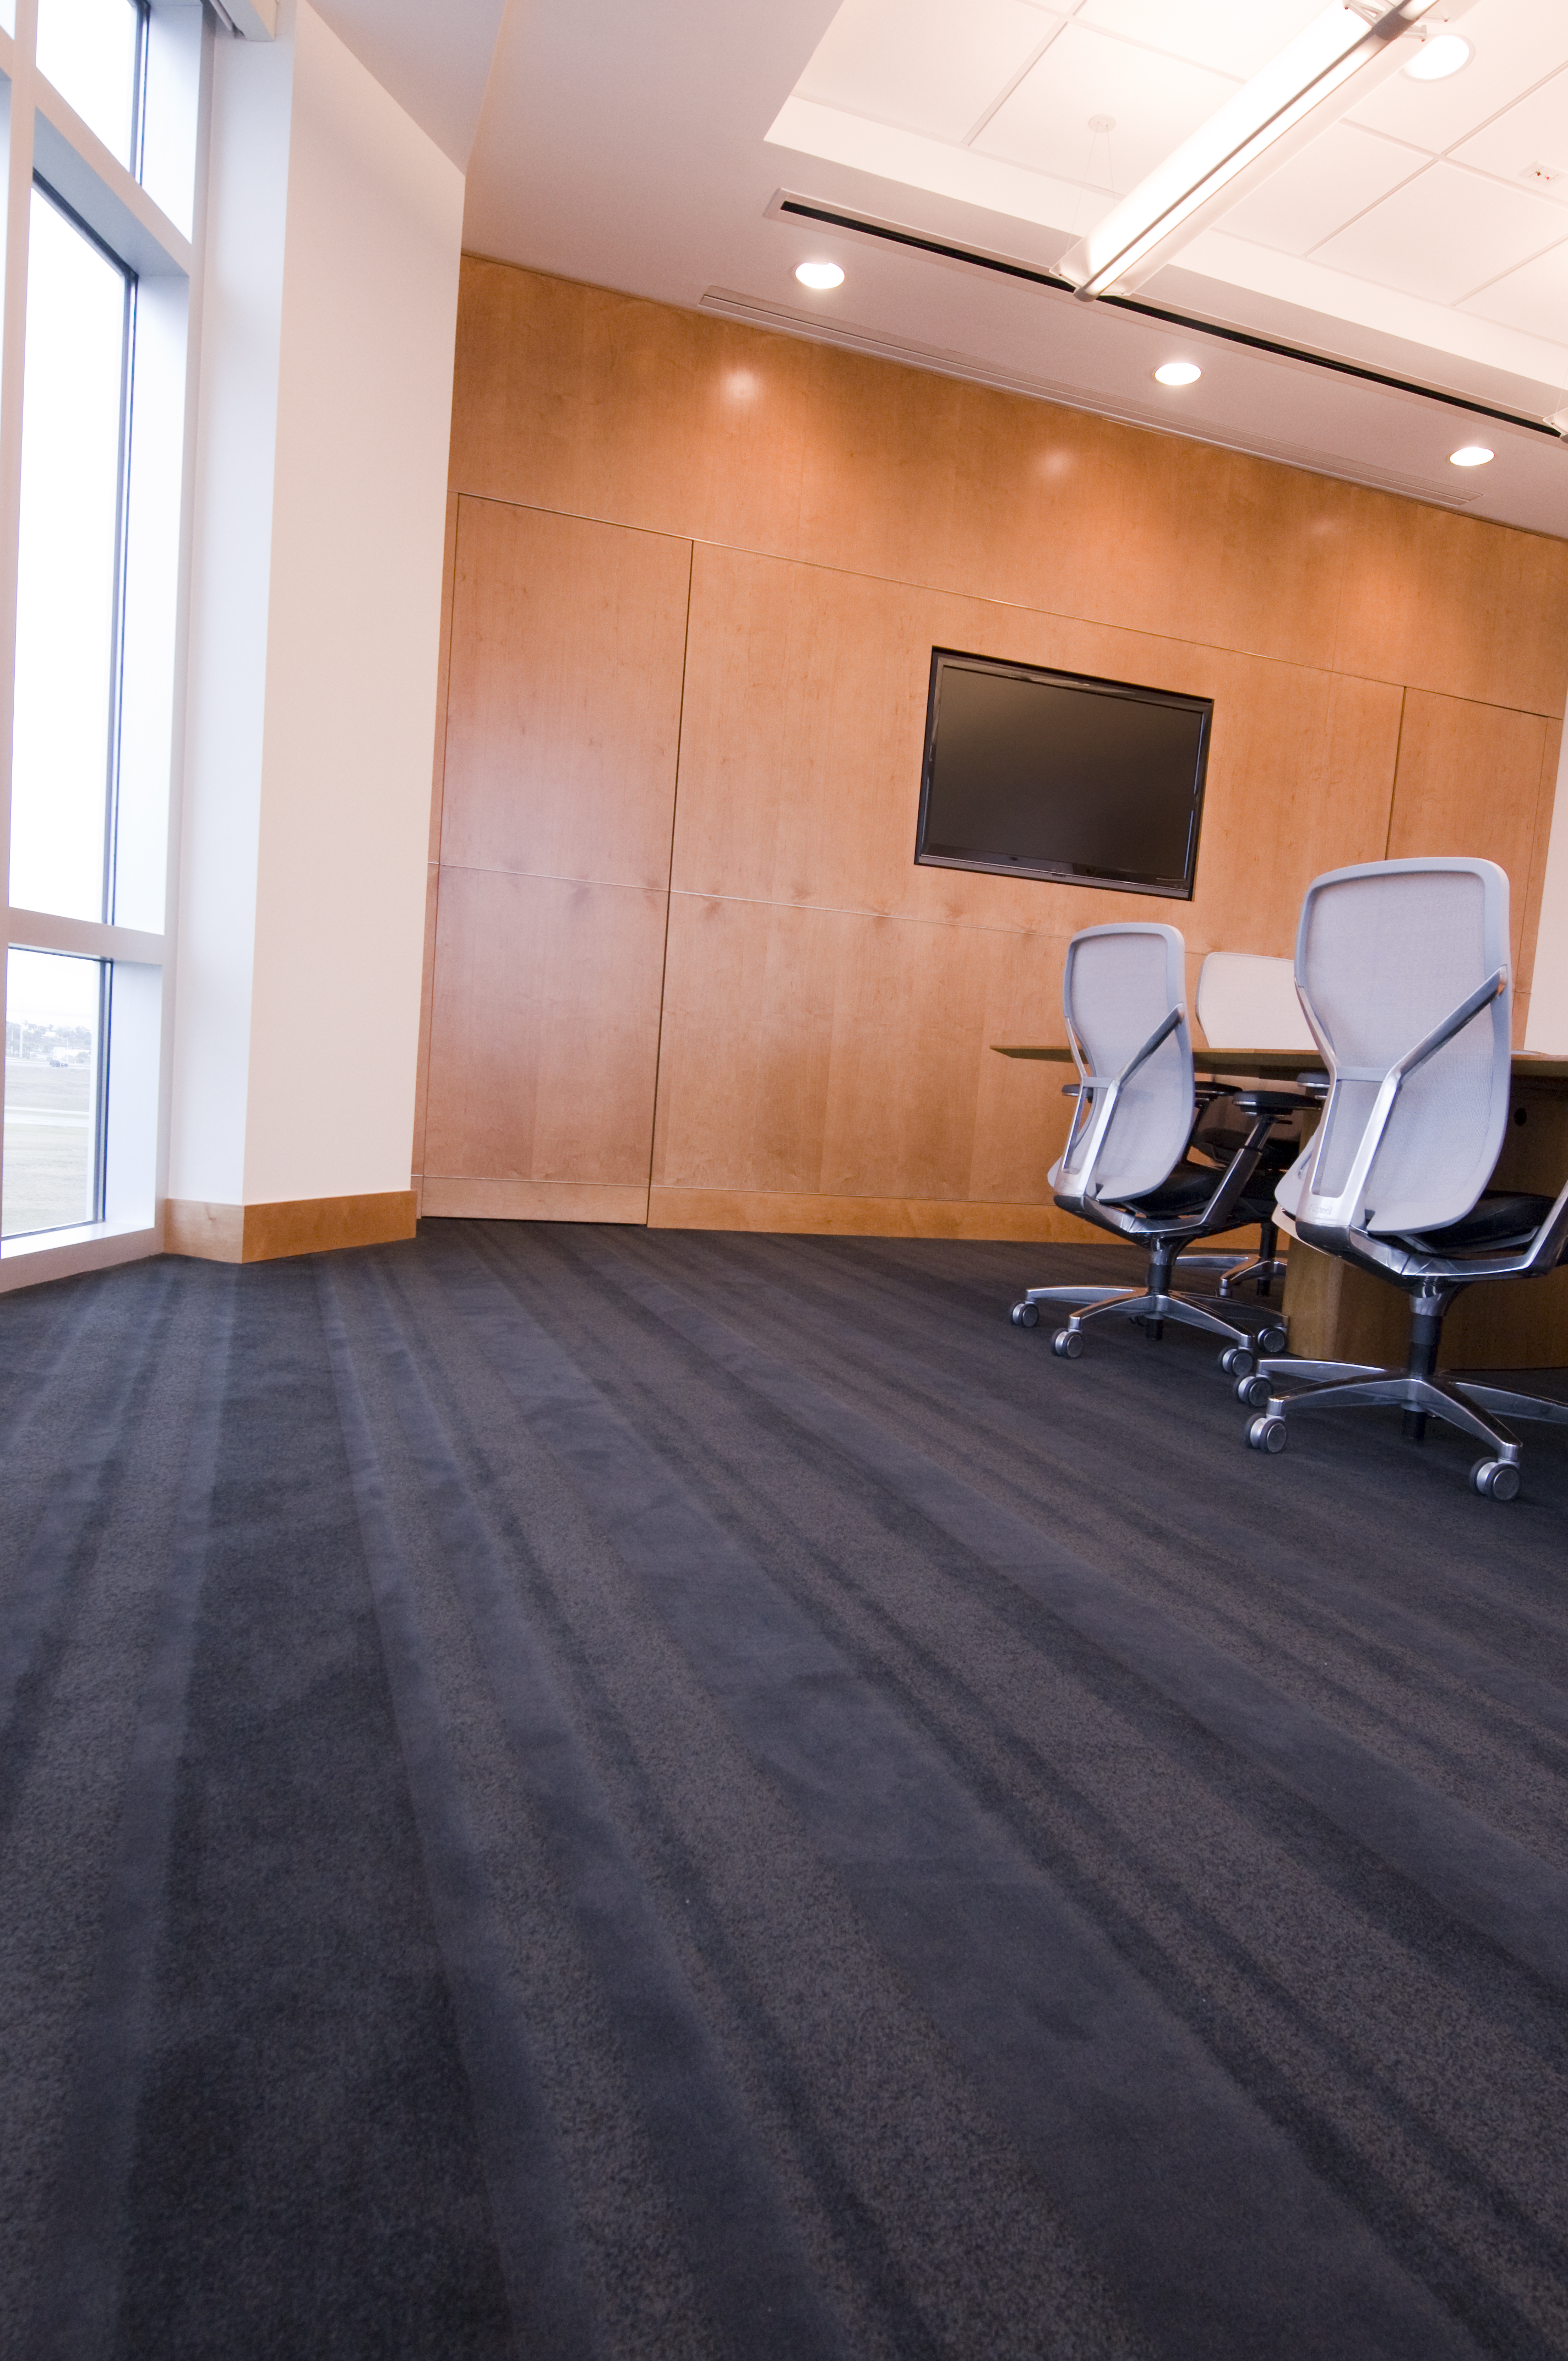 Commercial Carpet Cleaning For Appearance And Health